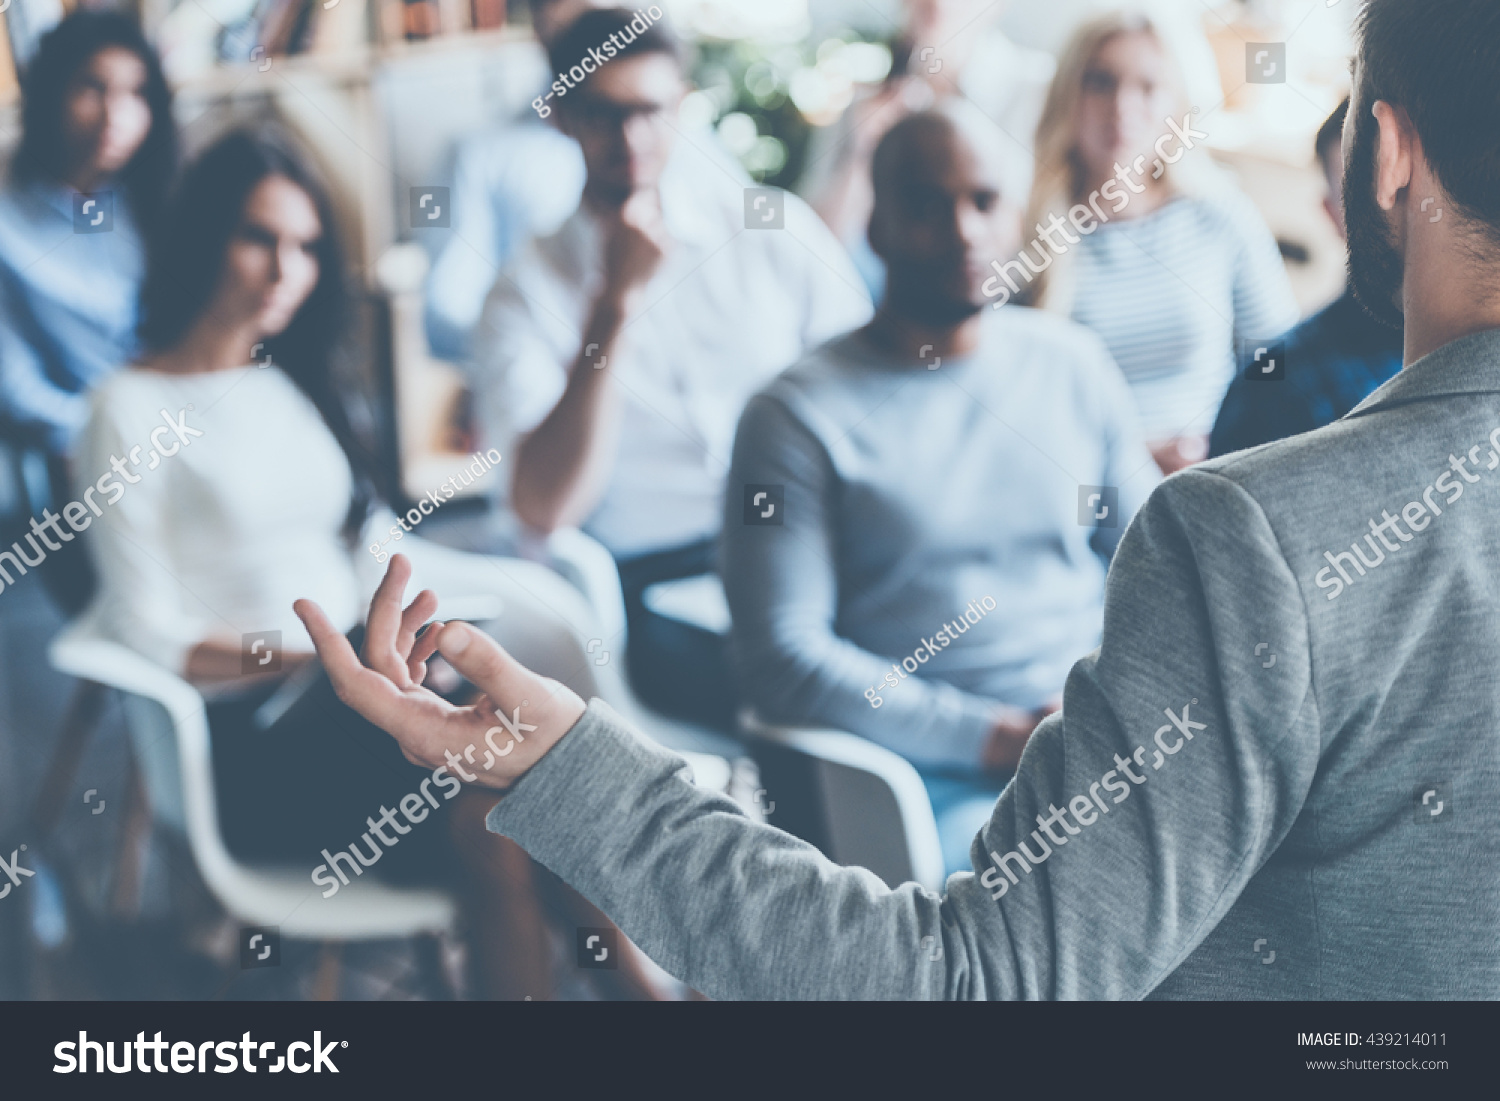 stock-photo-business-coach-rear-view-of-man-gesturing-with-hand-while-standing-against-defocused-group-of-439214011